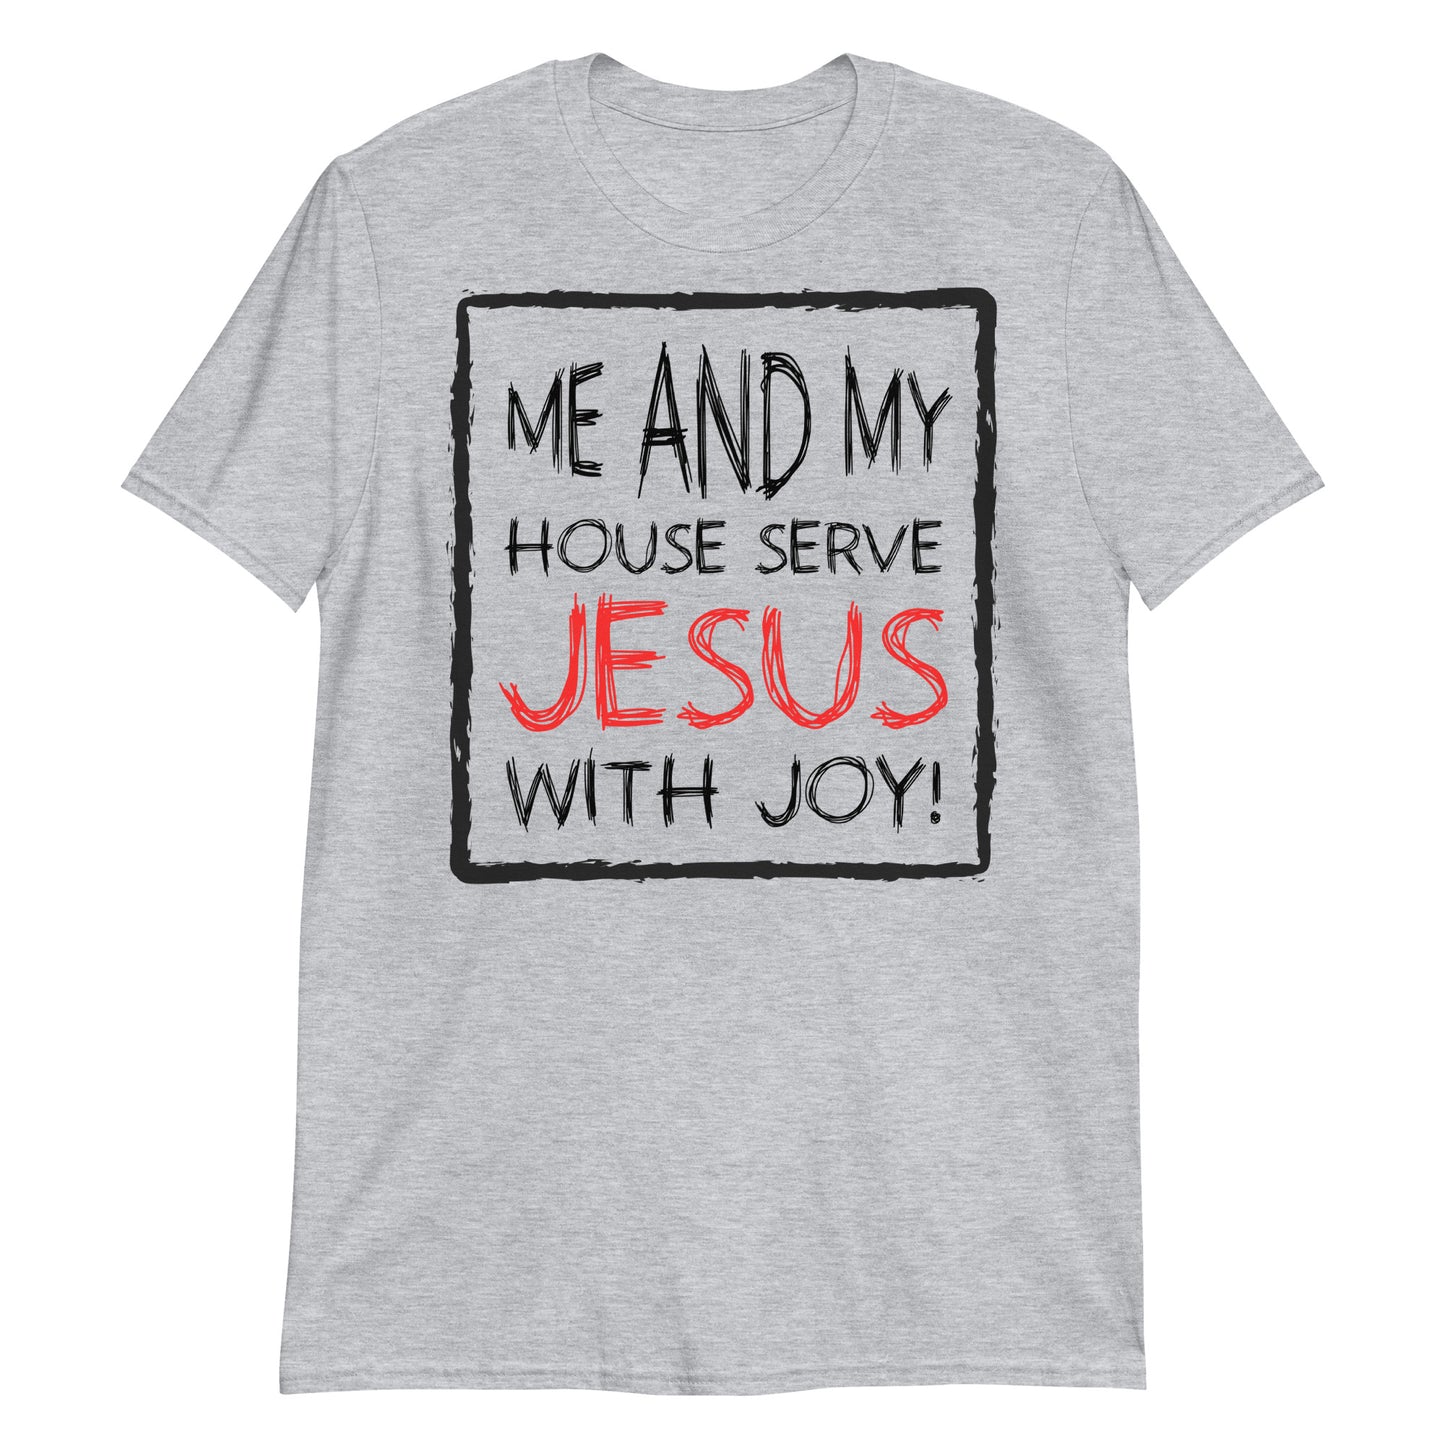 Me and My House Serve Jesus With Joy Fit Unisex Softstyle T-Shirt